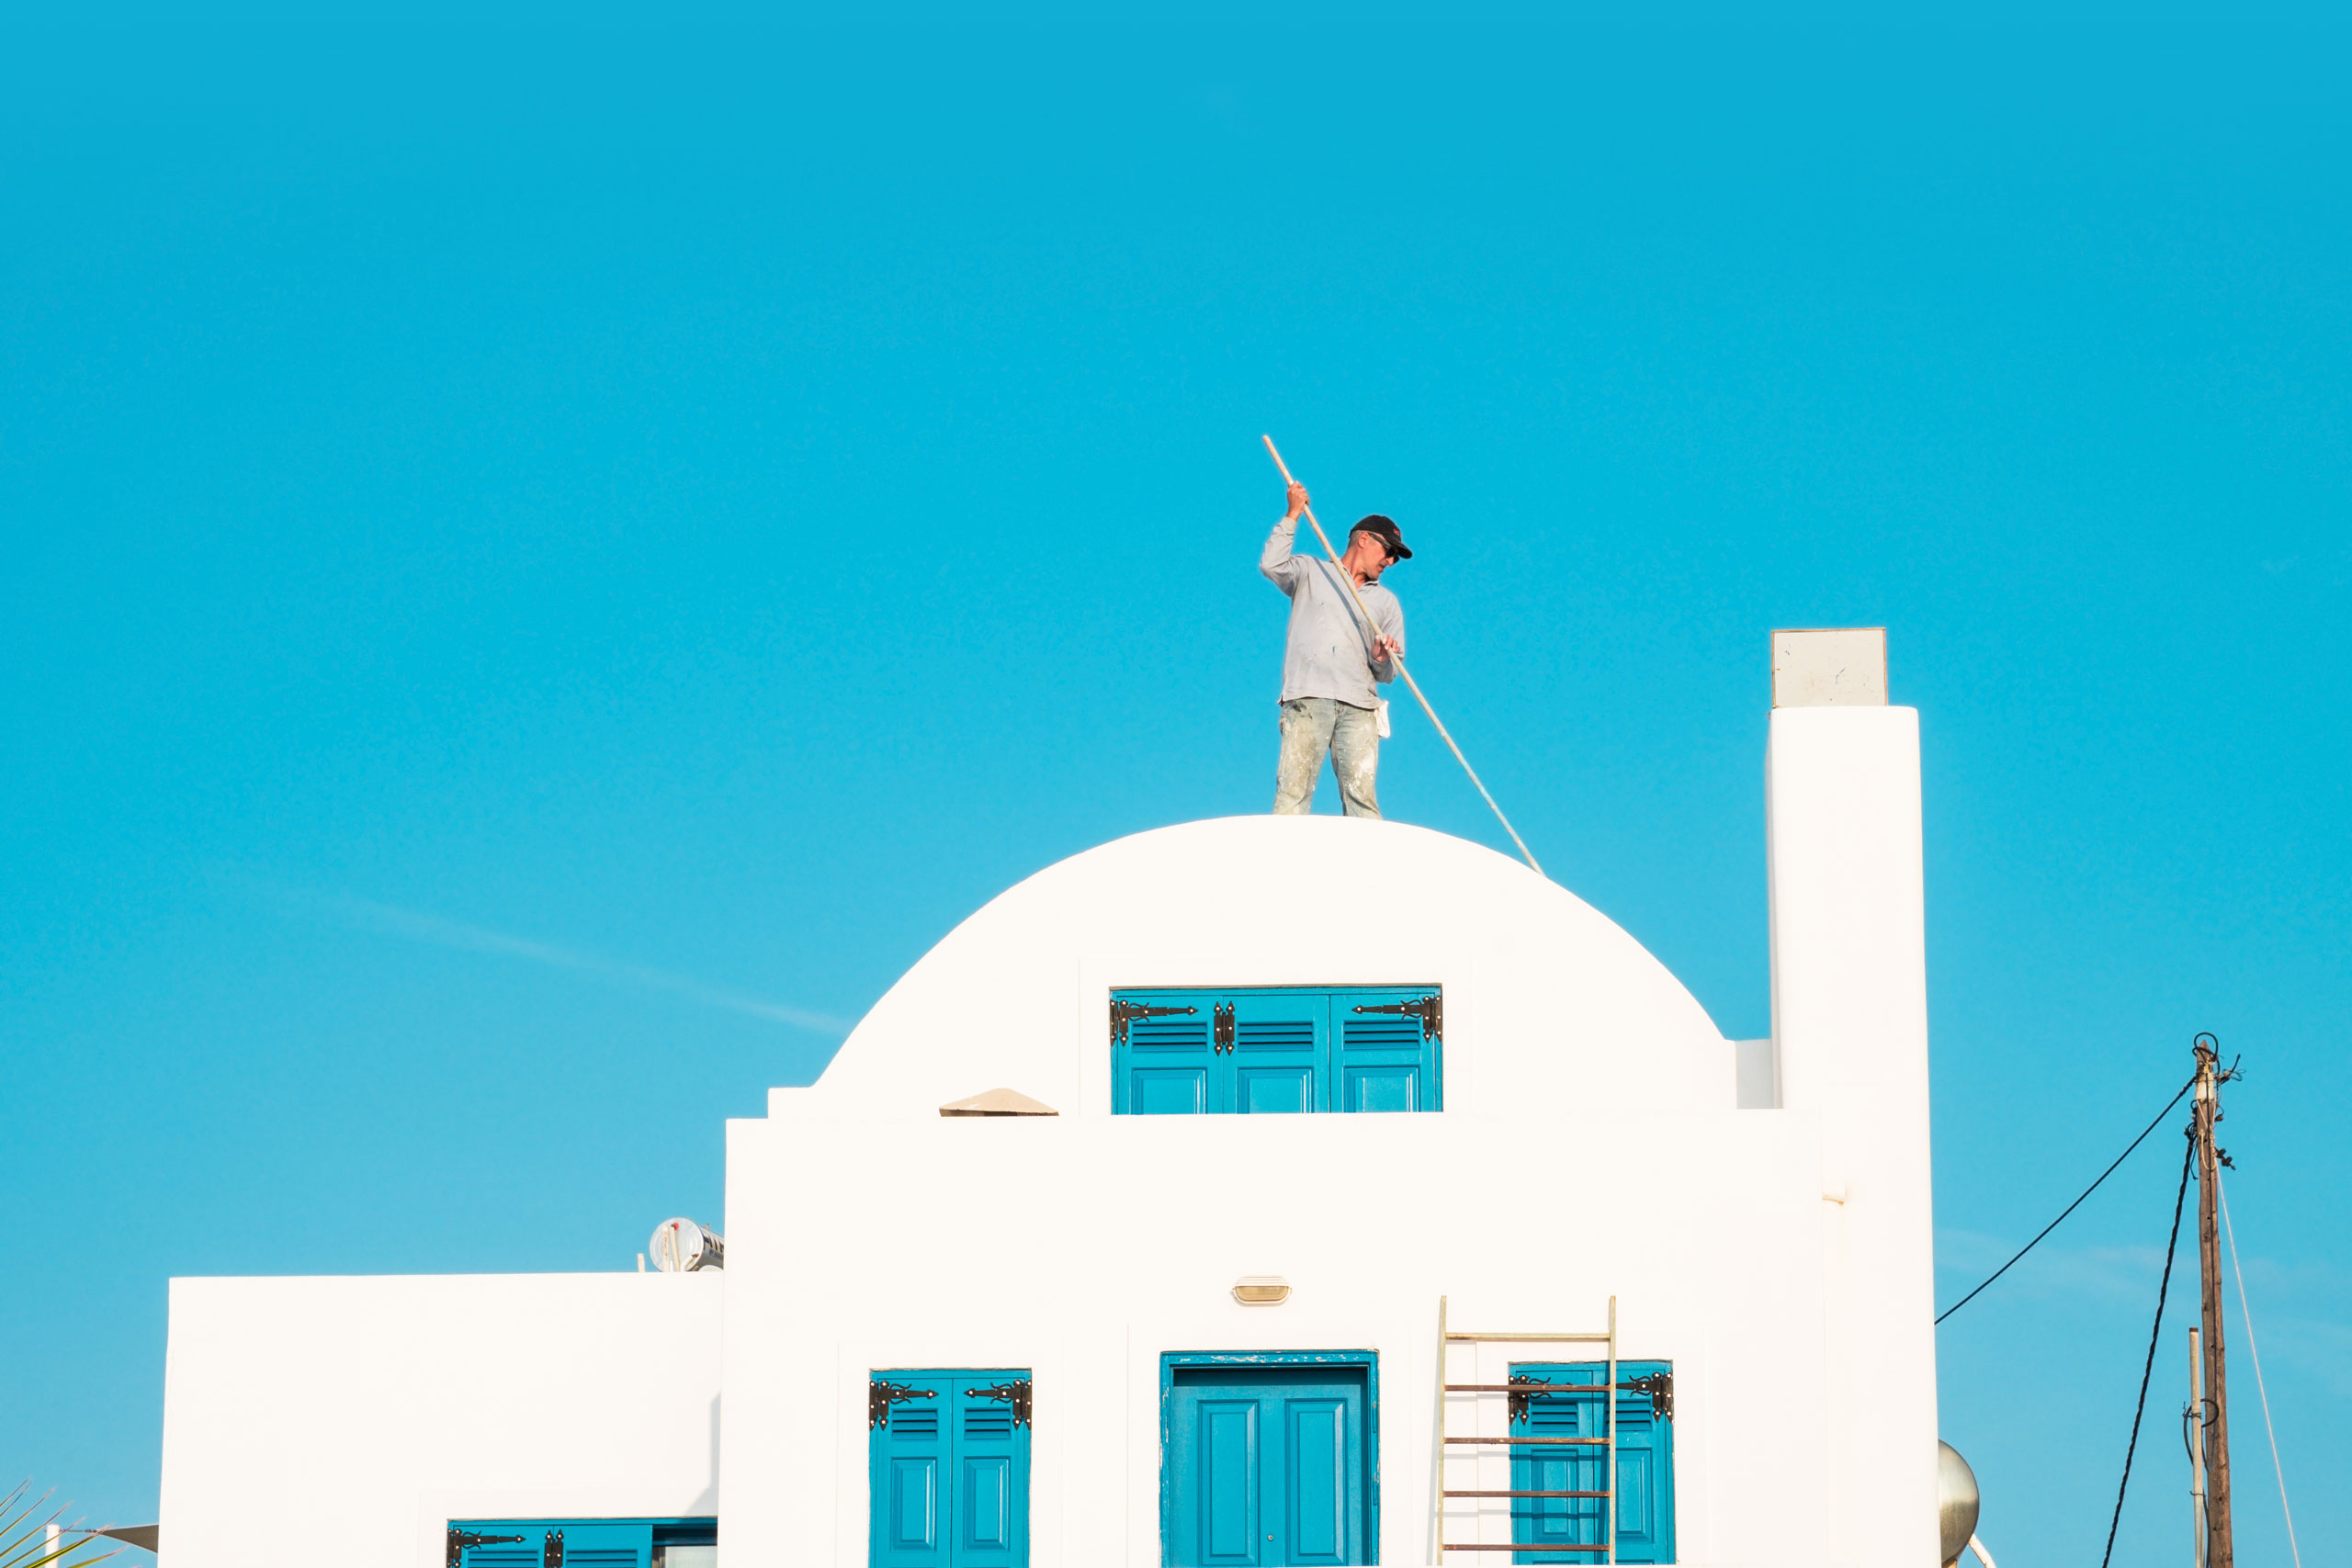 A man painting the roof in Santorini, Greece. Photo by Jari Anttonen.